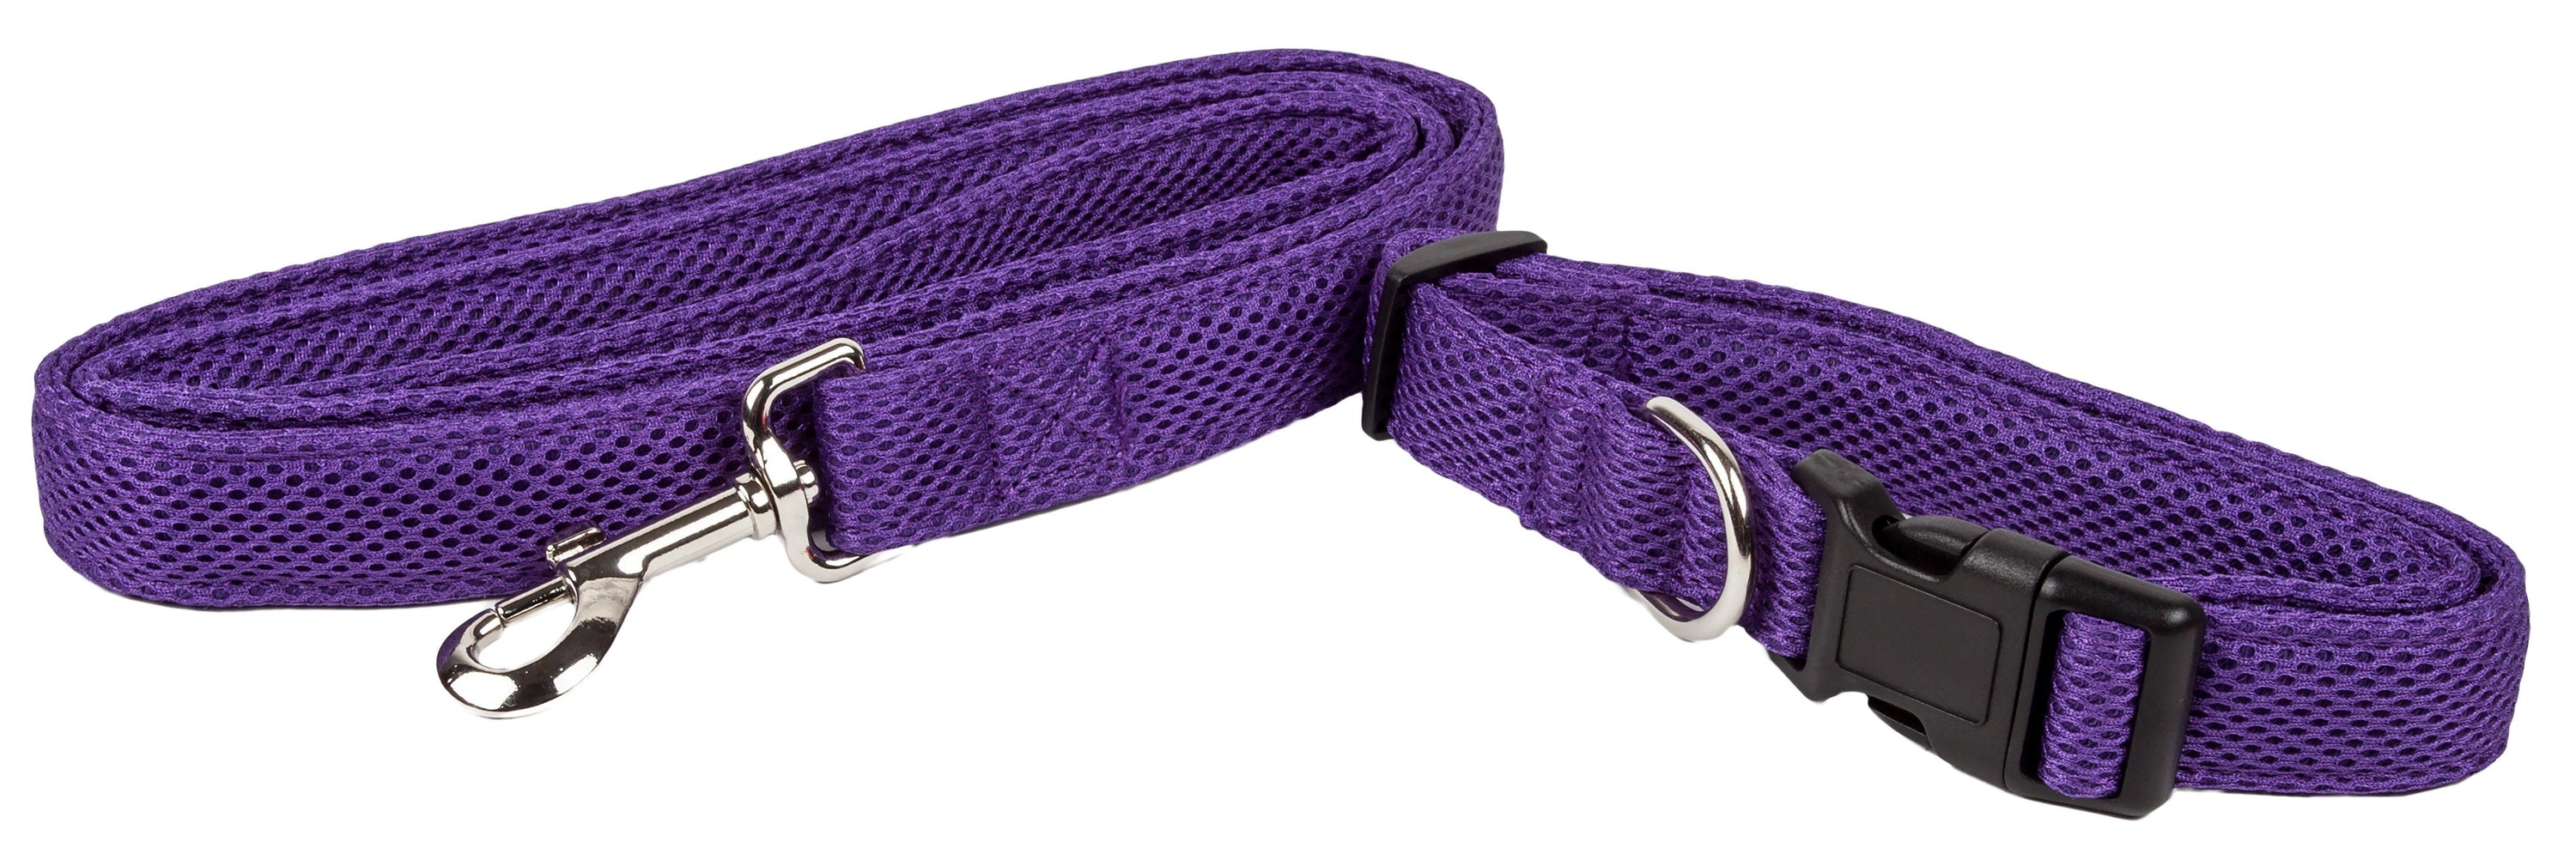 Pet Life ® 'Aero Mesh' 2-In-1 Breathable and Adjustable Dual-Sided Mesh Dog Leash and Collar  